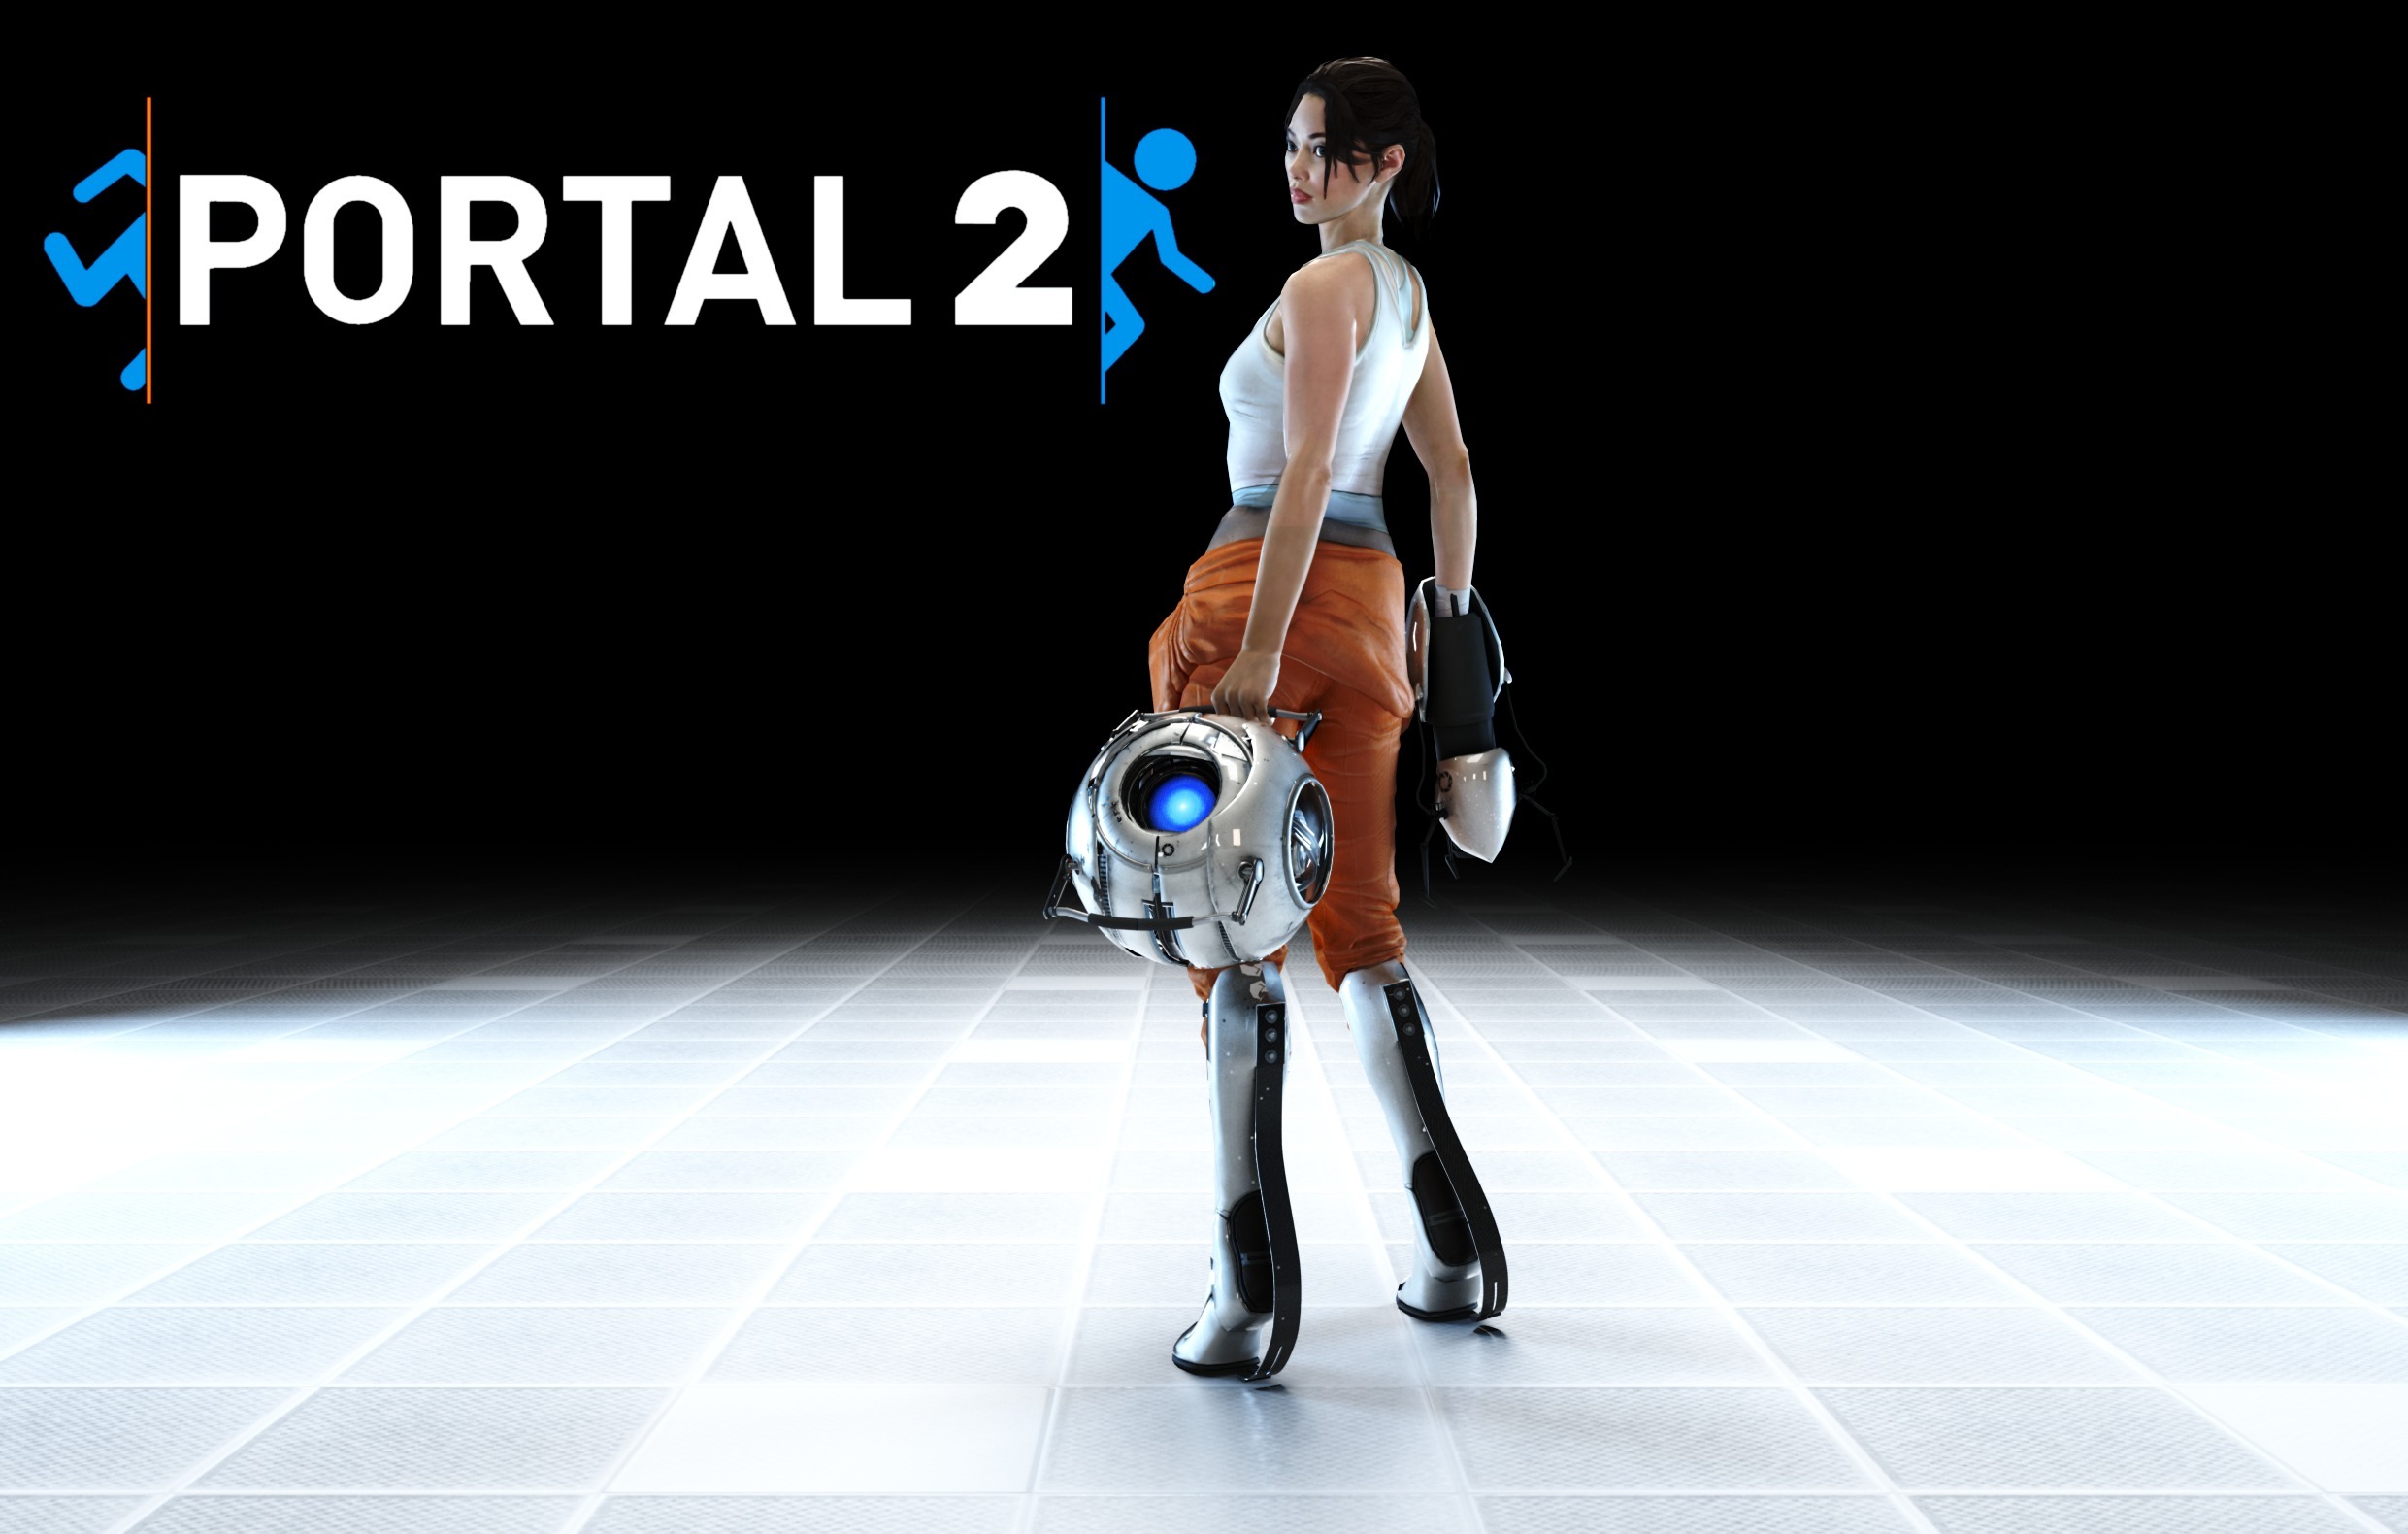 android portal 2 image